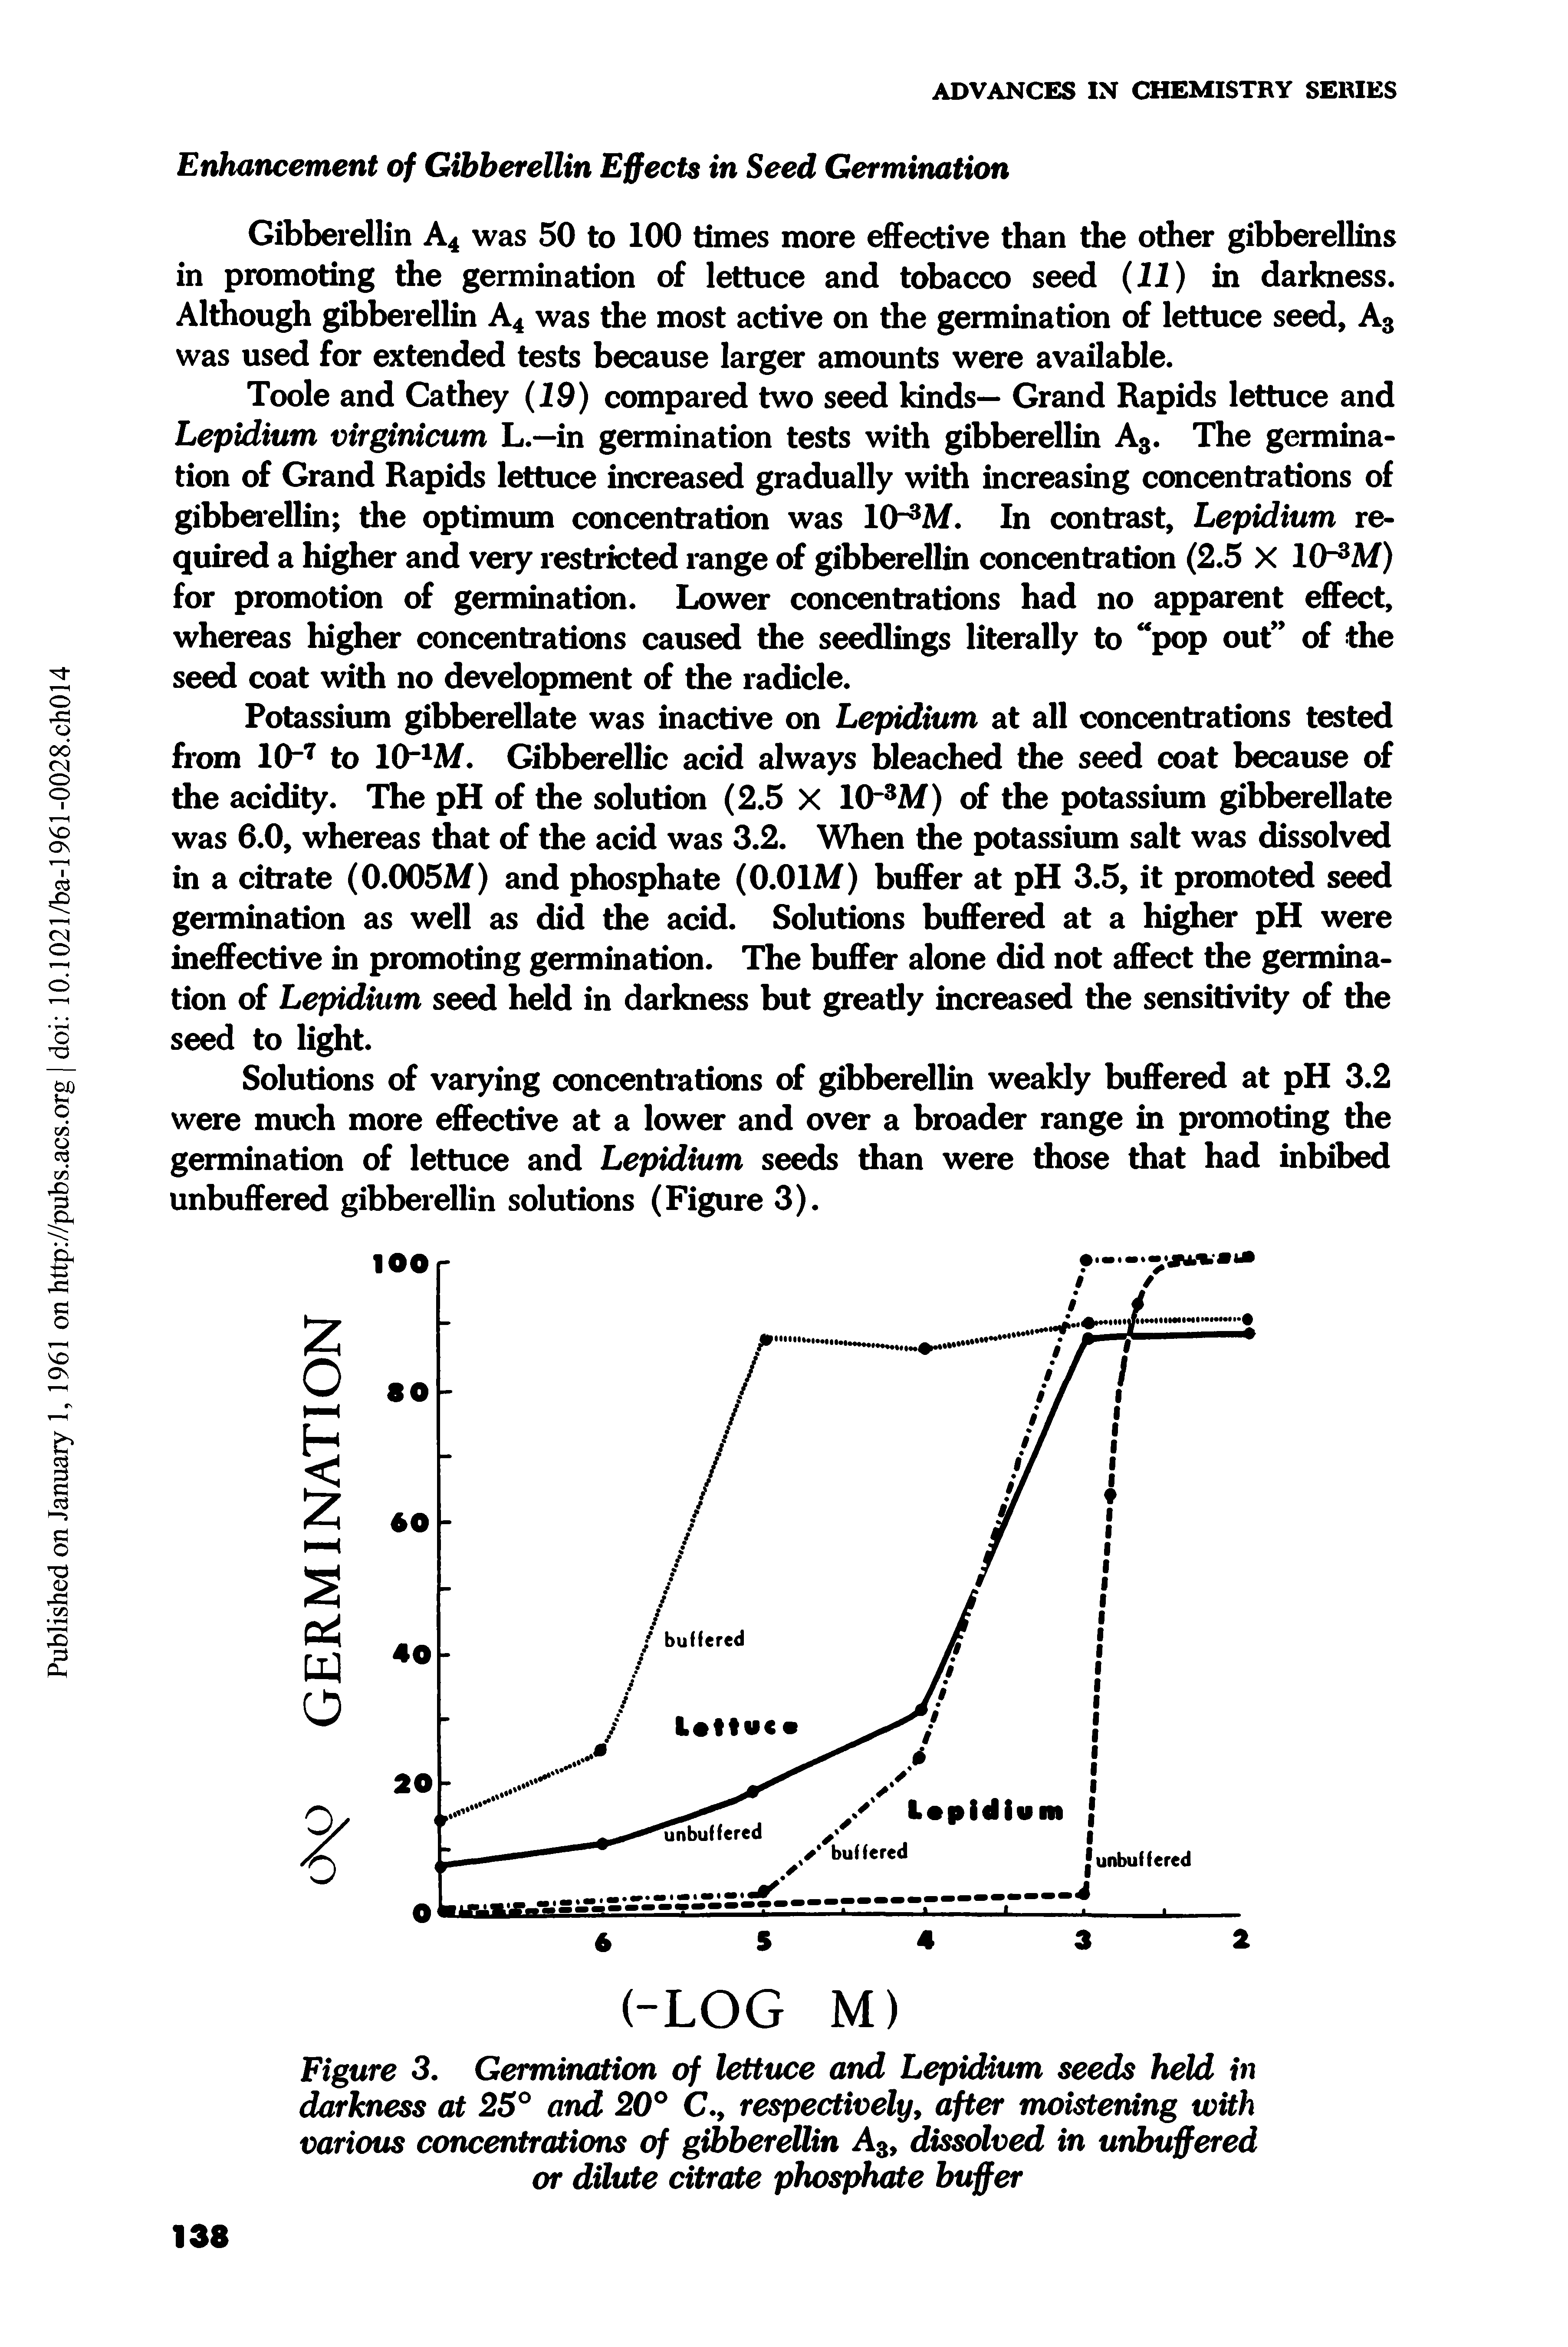 Figure 3. Germination of lettuce and Lepidium seeds held in darkness at 25° and 20° C., respectively, after moistening with various concentrations of gibberellin A3, dissolved in unbuffered or dilute citrate phosphate buffer...